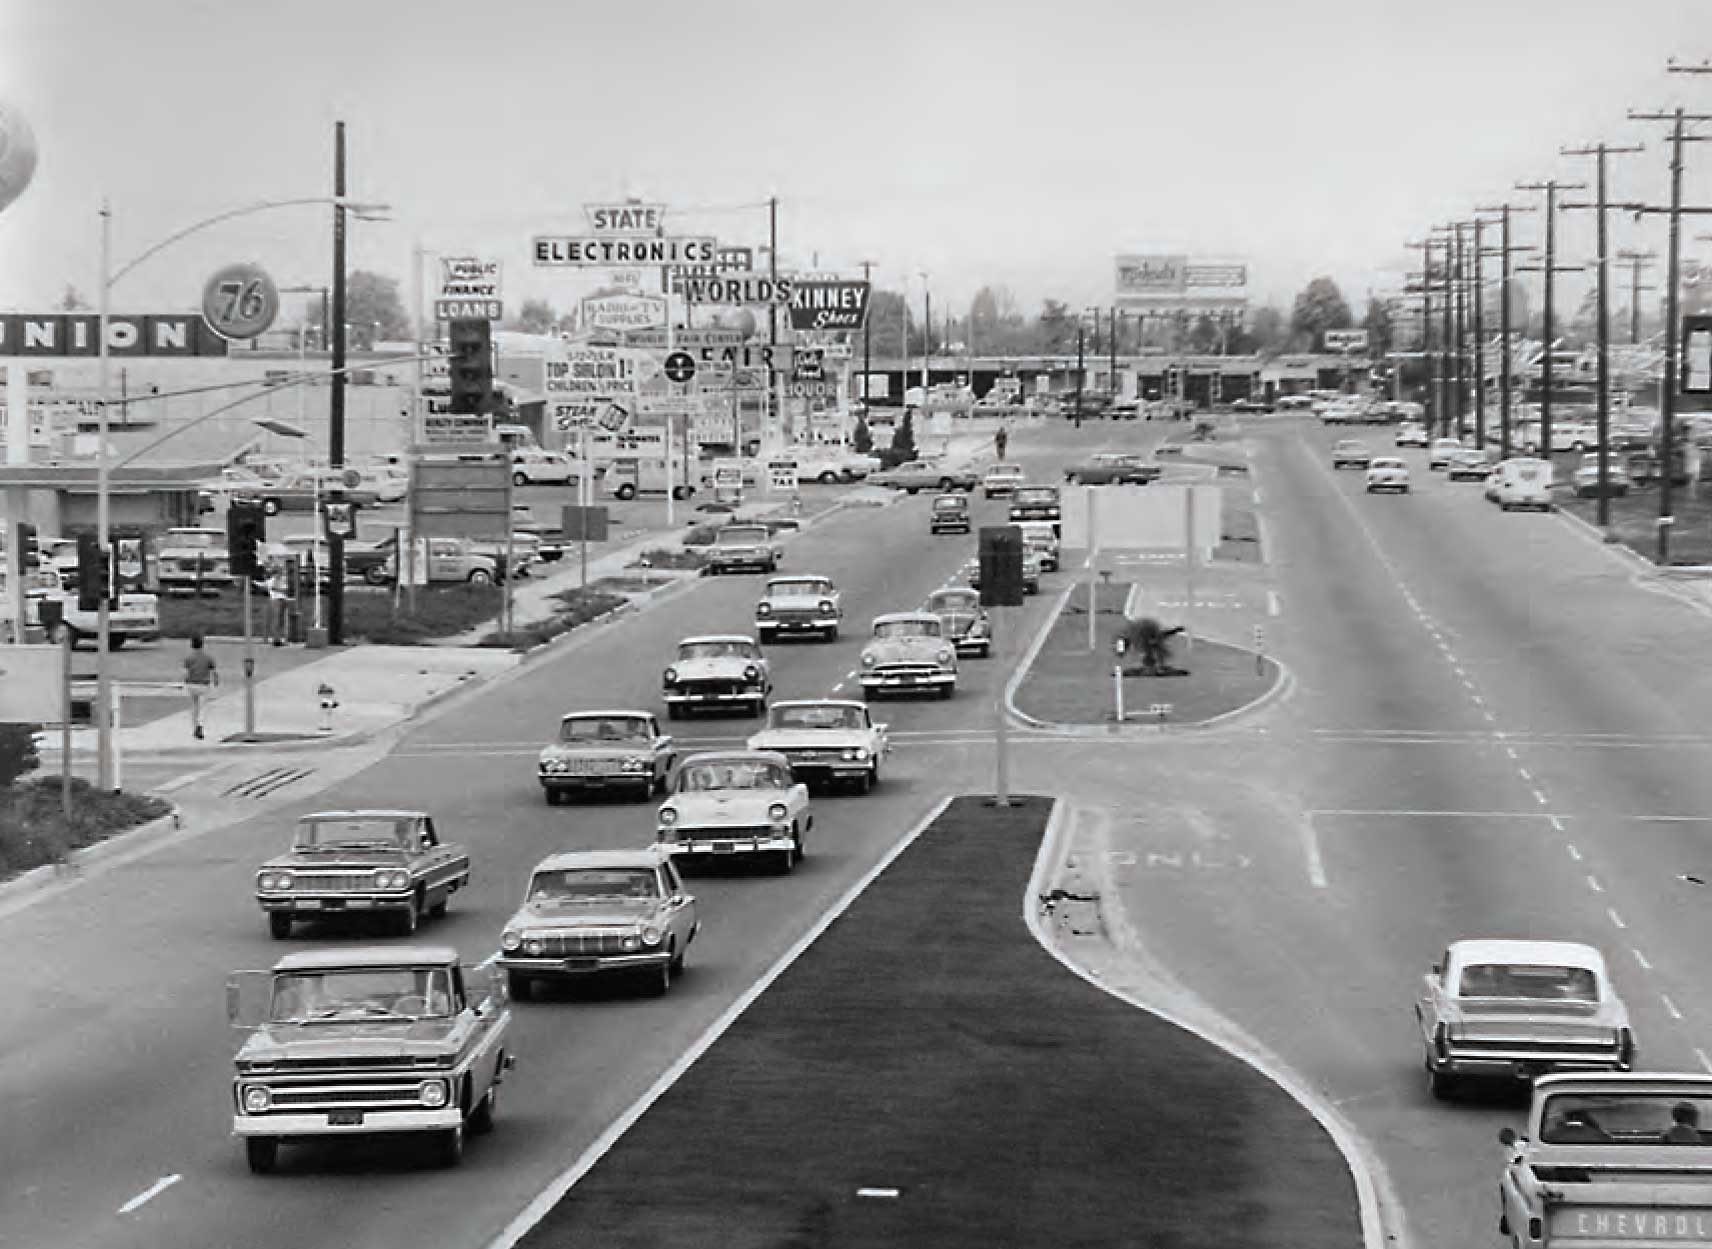 Harbor Boulevard in Orange County, California, in the mid-1960s. The 1965 edition of the HCM introduced the concept of levels of service, and HCM6 offers tools for additional performance measures.